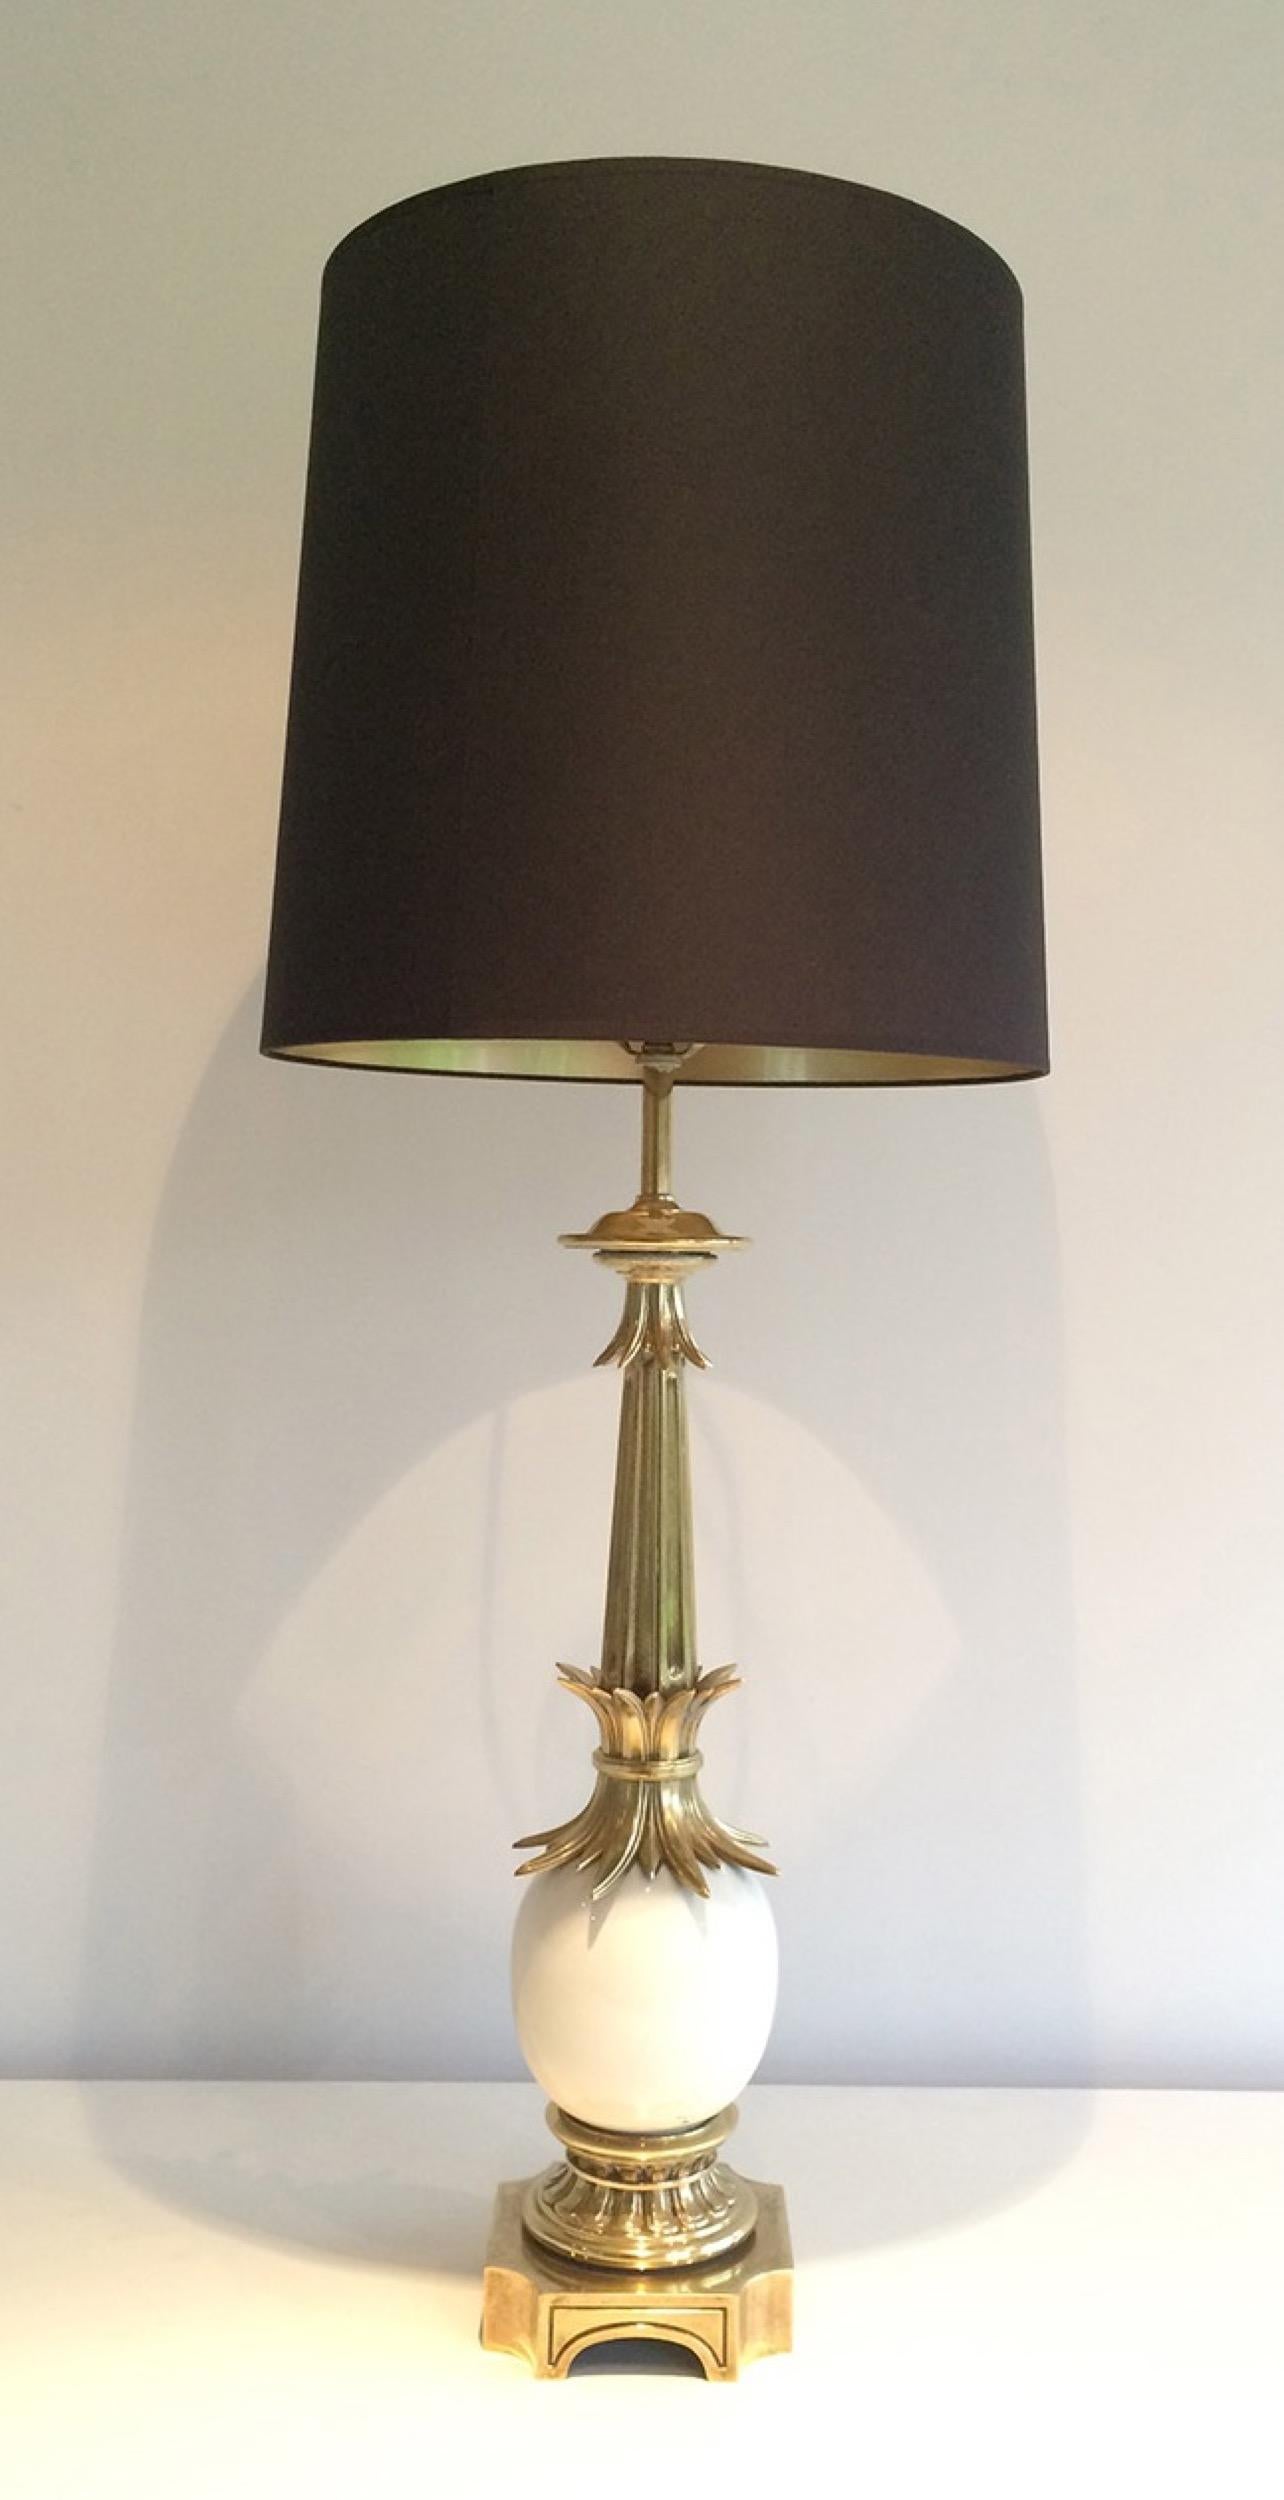 This very nice ostrich egg table lamp is made of stylised bronze pieces and a ceramic faux-ostrich egg. This is a very nice and a very good quality work, in the style of famous French designer and maker Maison Charles, circa 1960.